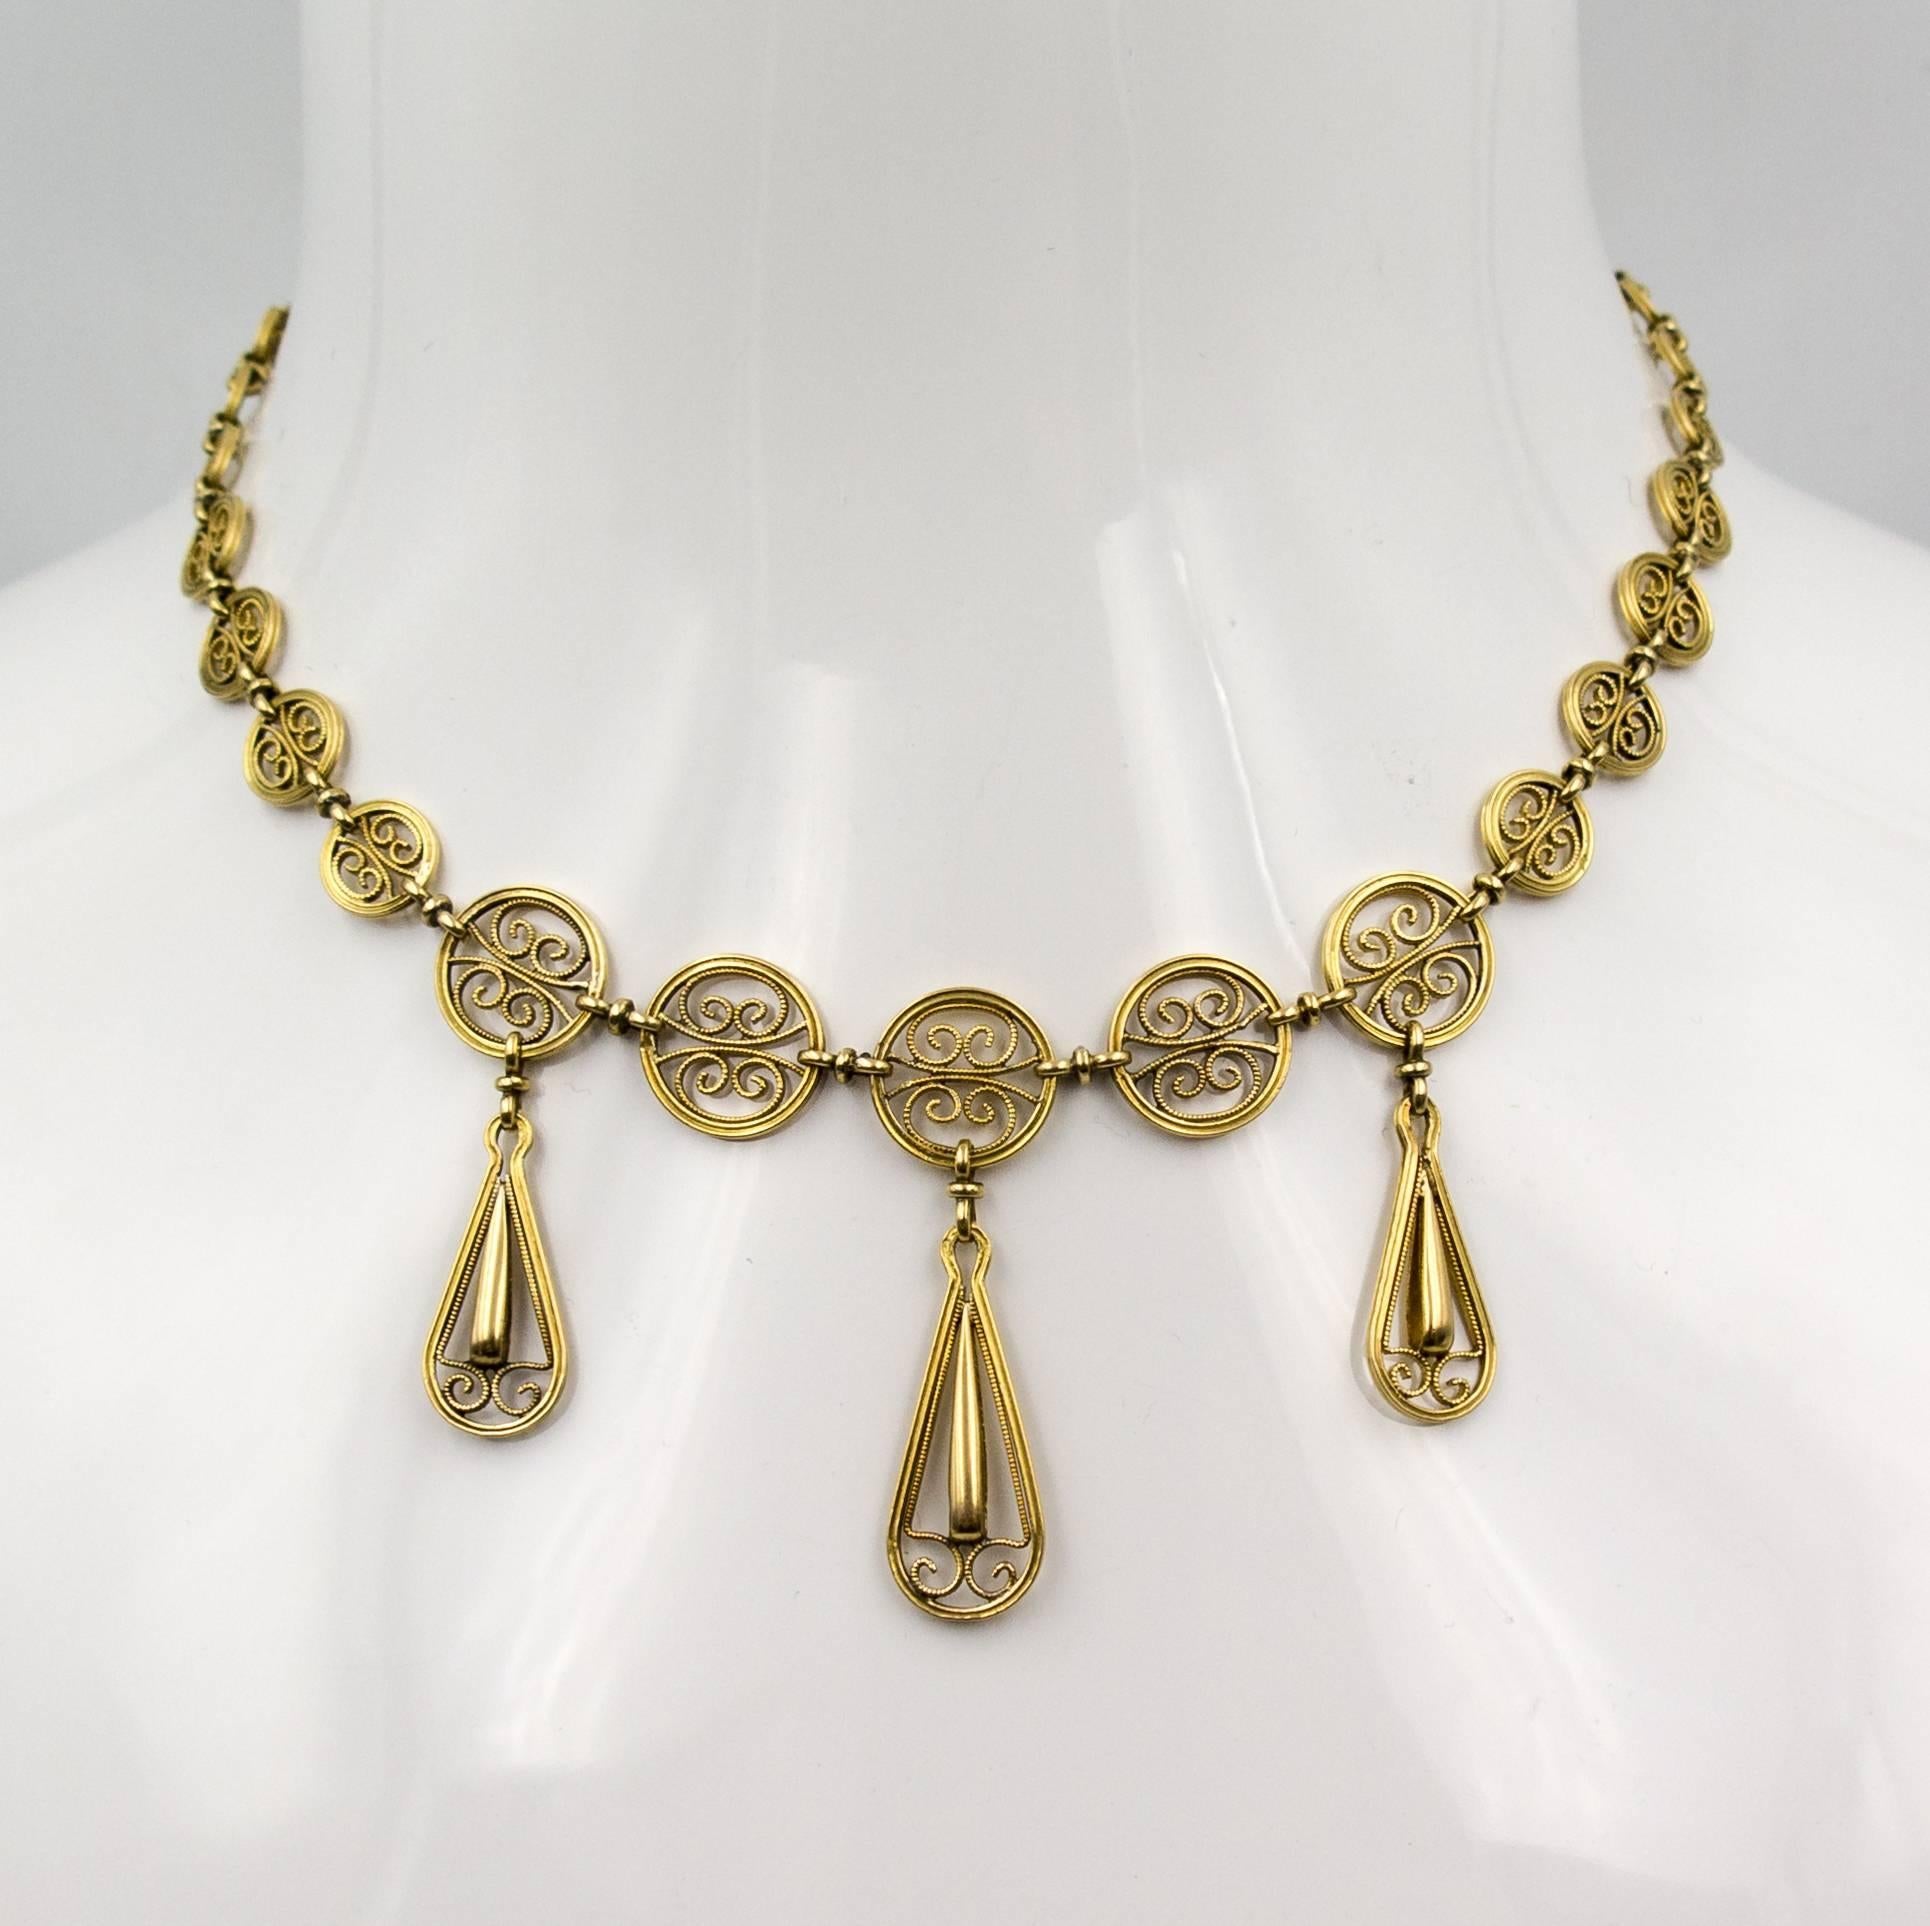 Intricately scrolled filaments of handworked gold form beautiful curlicues to surround the wearer's face.  Crafted in 18 karat yellow gold, the necklace measures  15.75 inches.  